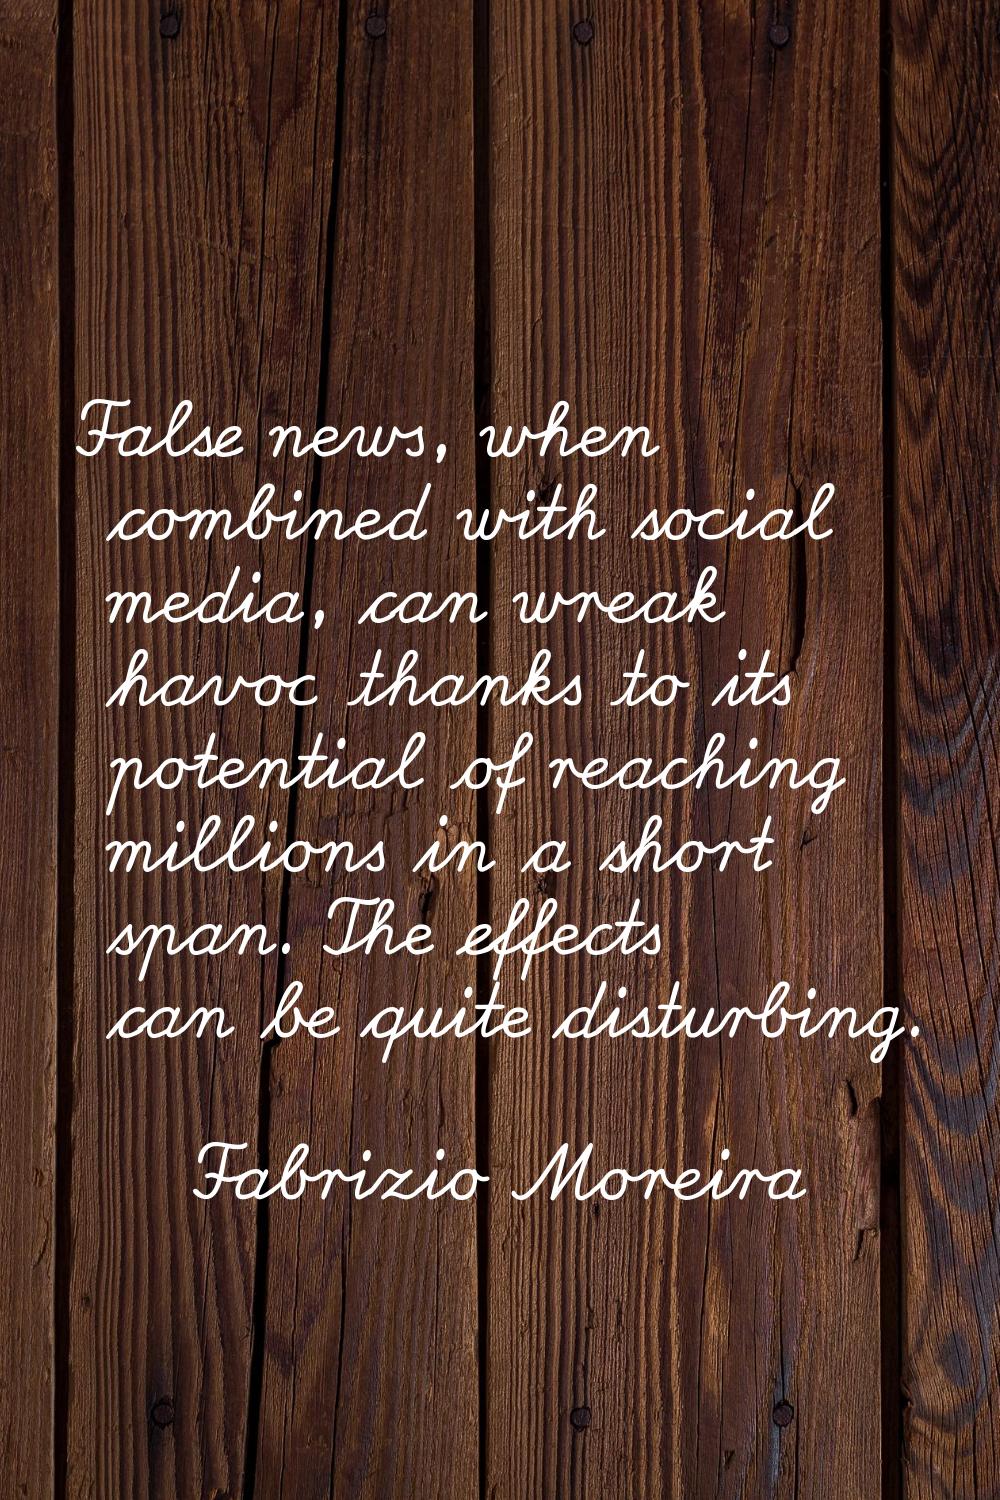 False news, when combined with social media, can wreak havoc thanks to its potential of reaching mi